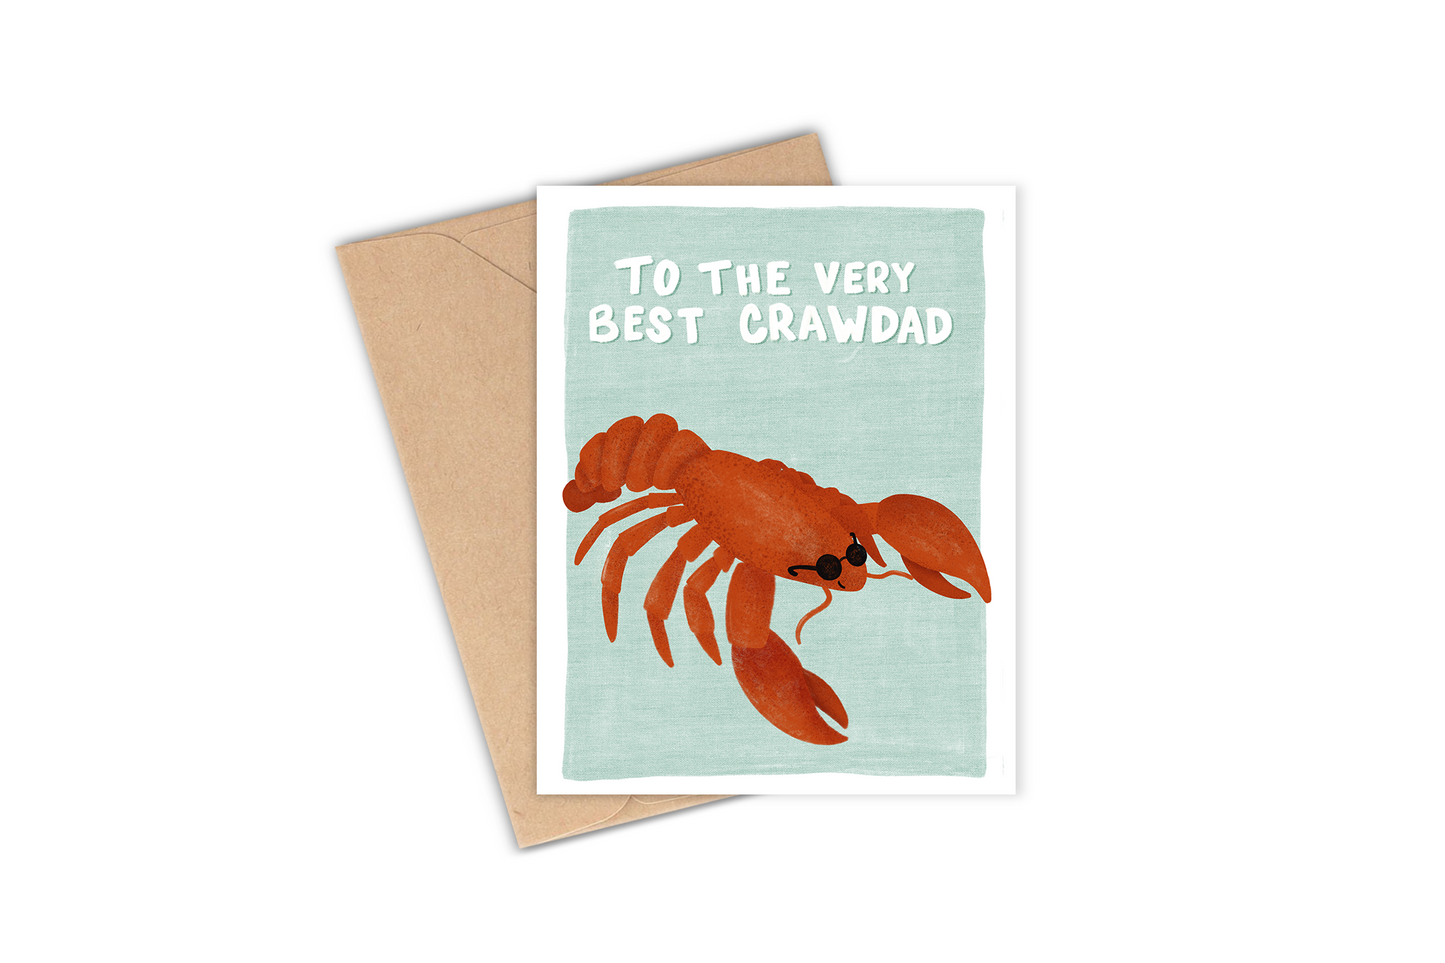 This card is perfect for the dad or father figure who can't get enough of that crawfish. Any crawdad or New Orleans, Louisiana lover will love this card.   Details: Hand-illustrated drawing of a crawfish wearing a pair of sunglasses with the phrase "To the very best crawdad" with a turquoise background.